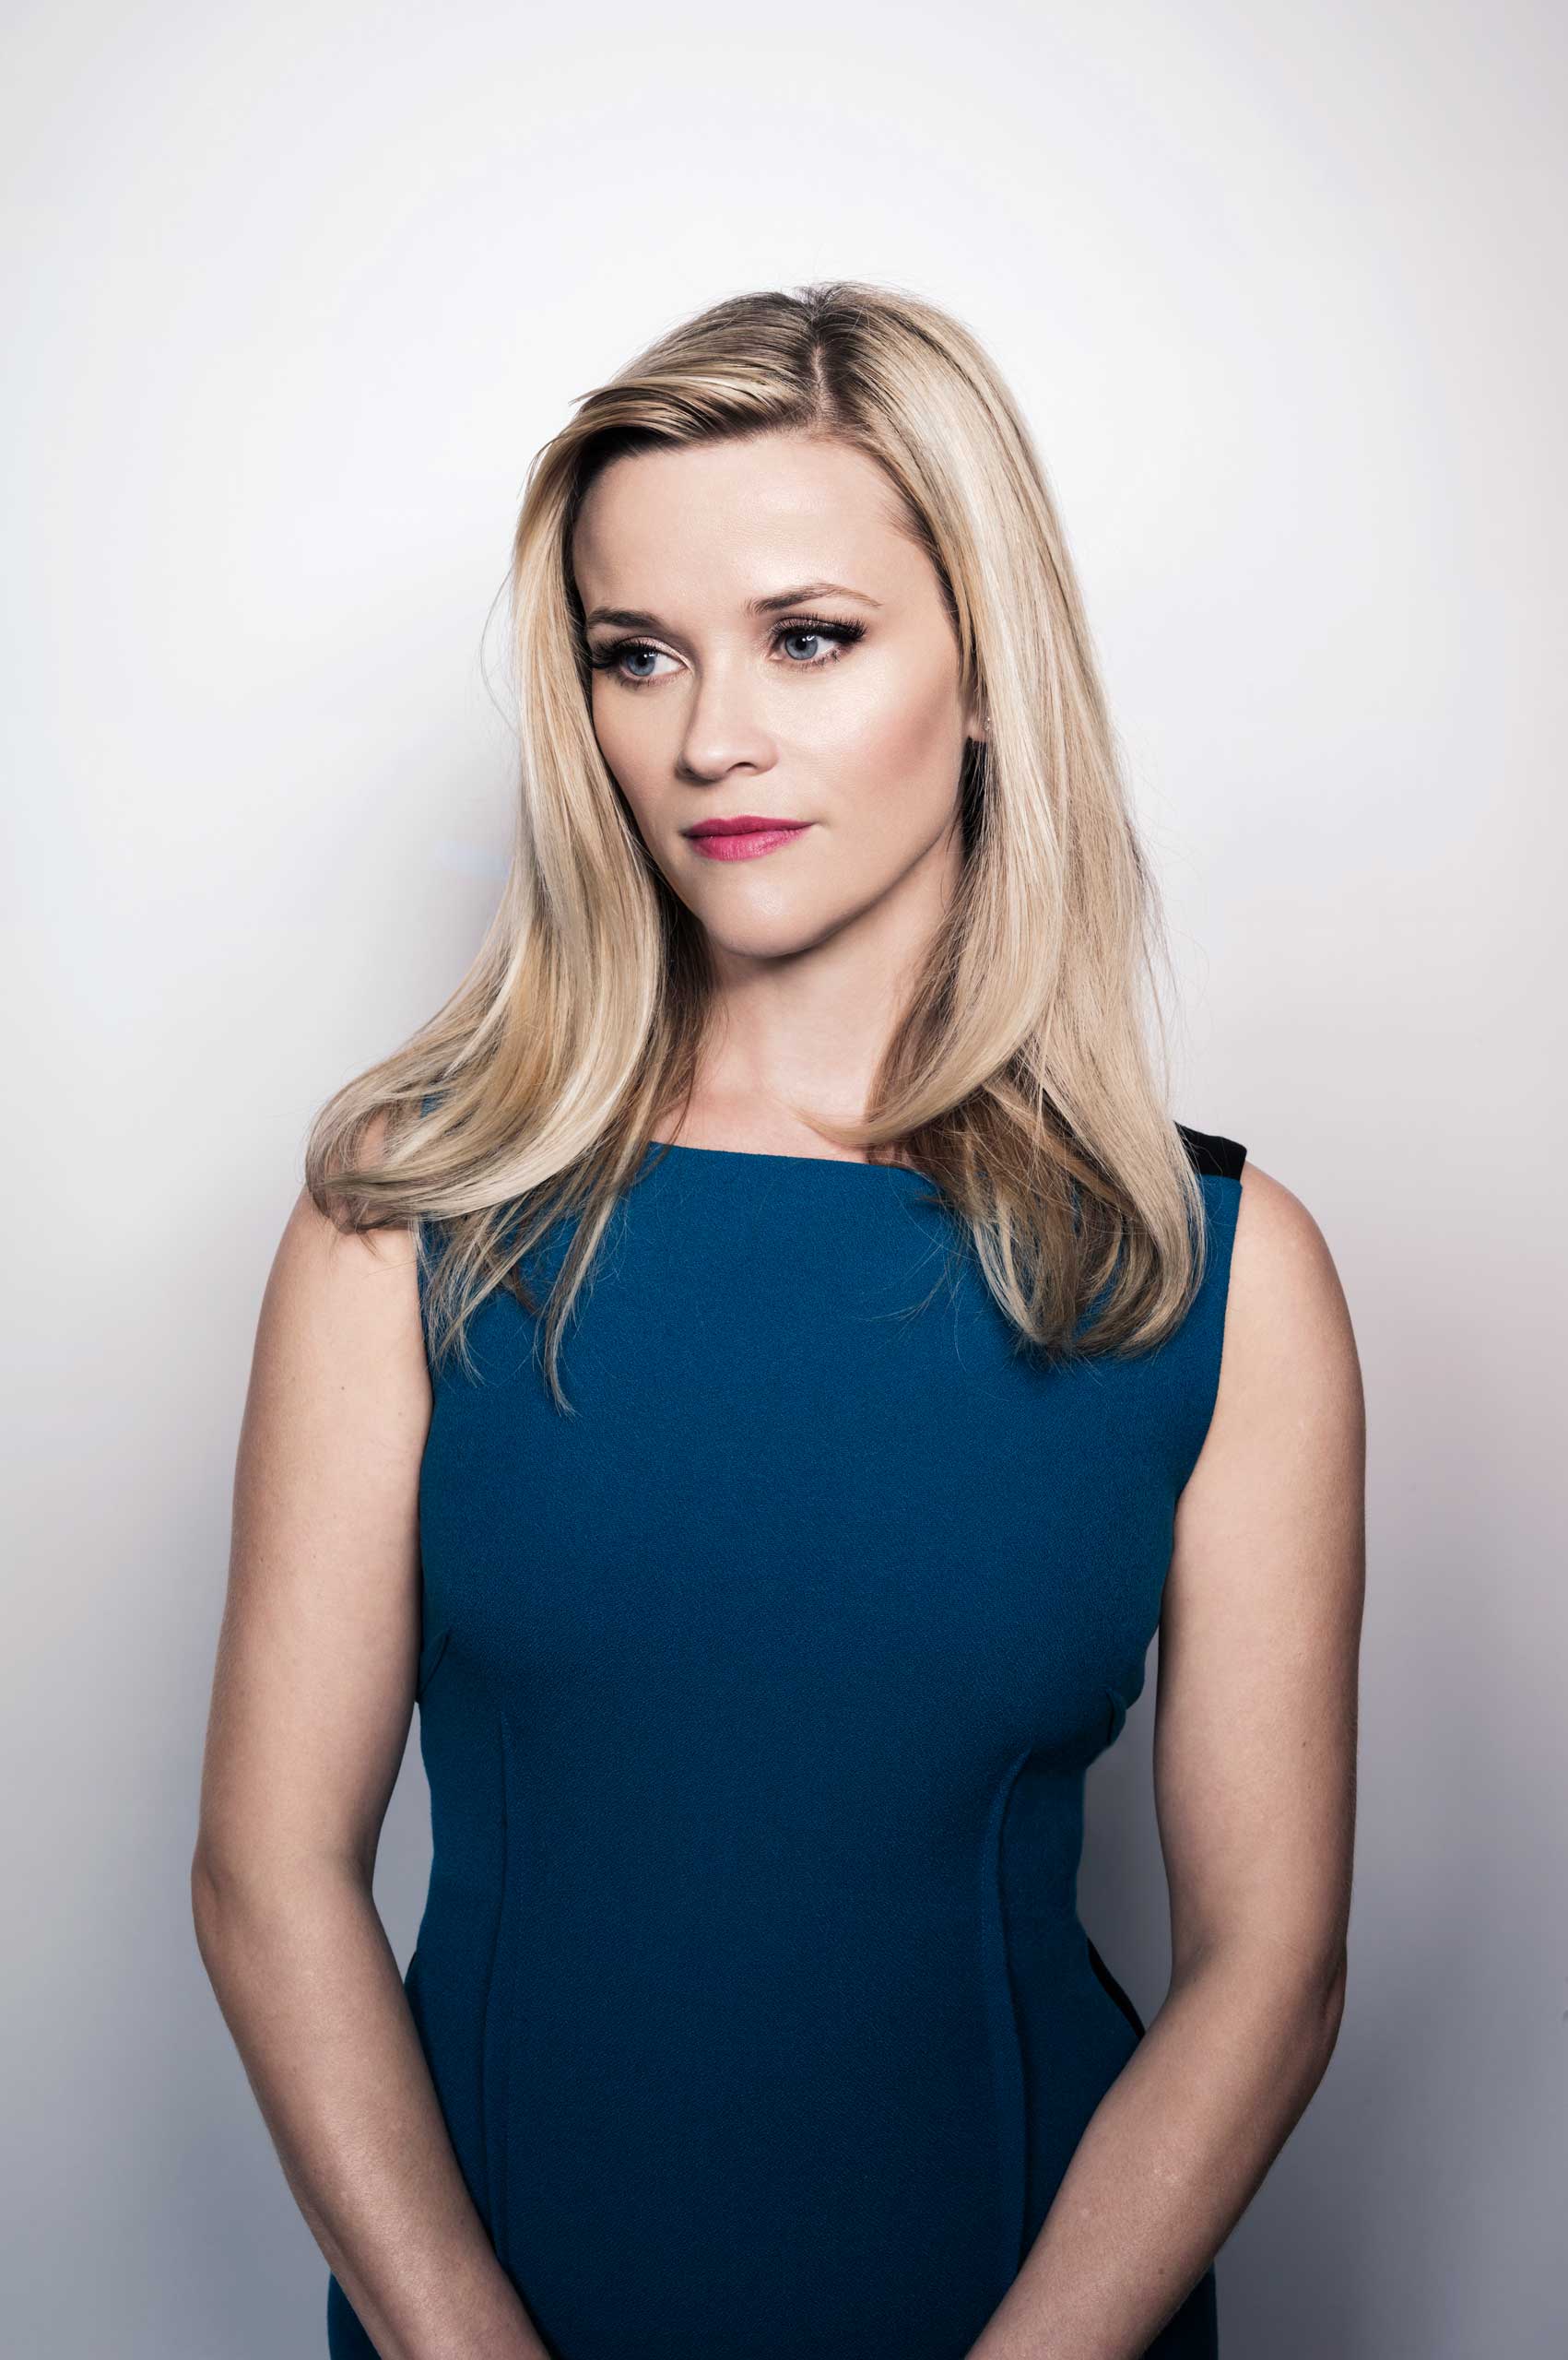 TIME 100 2015 Reese Witherspoon